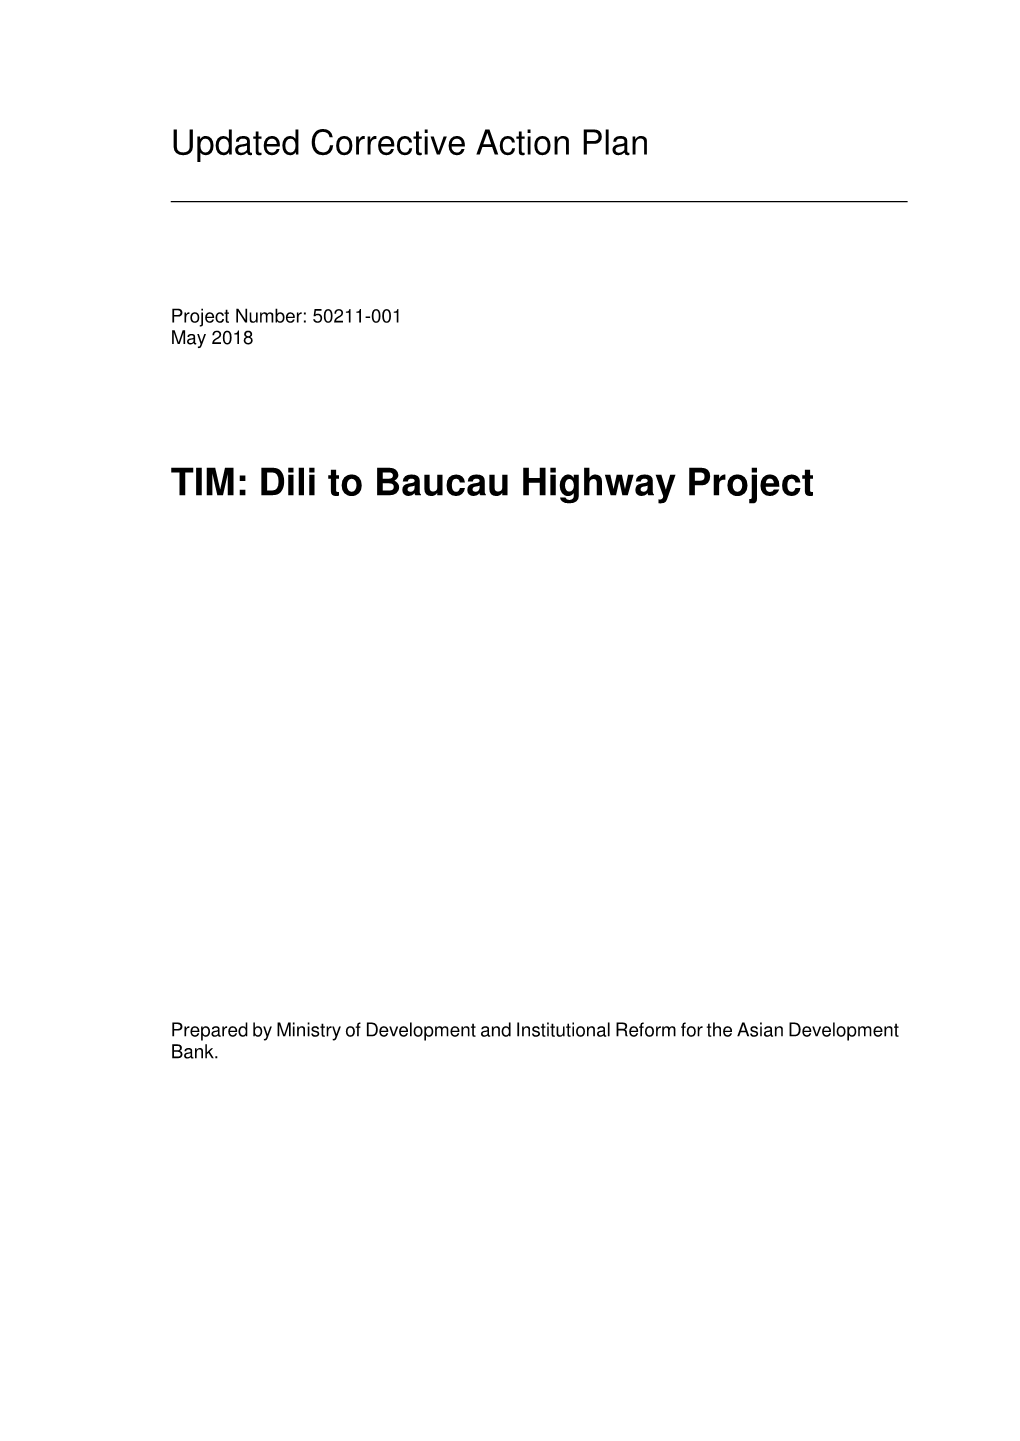 Dili to Baucau Highway Project